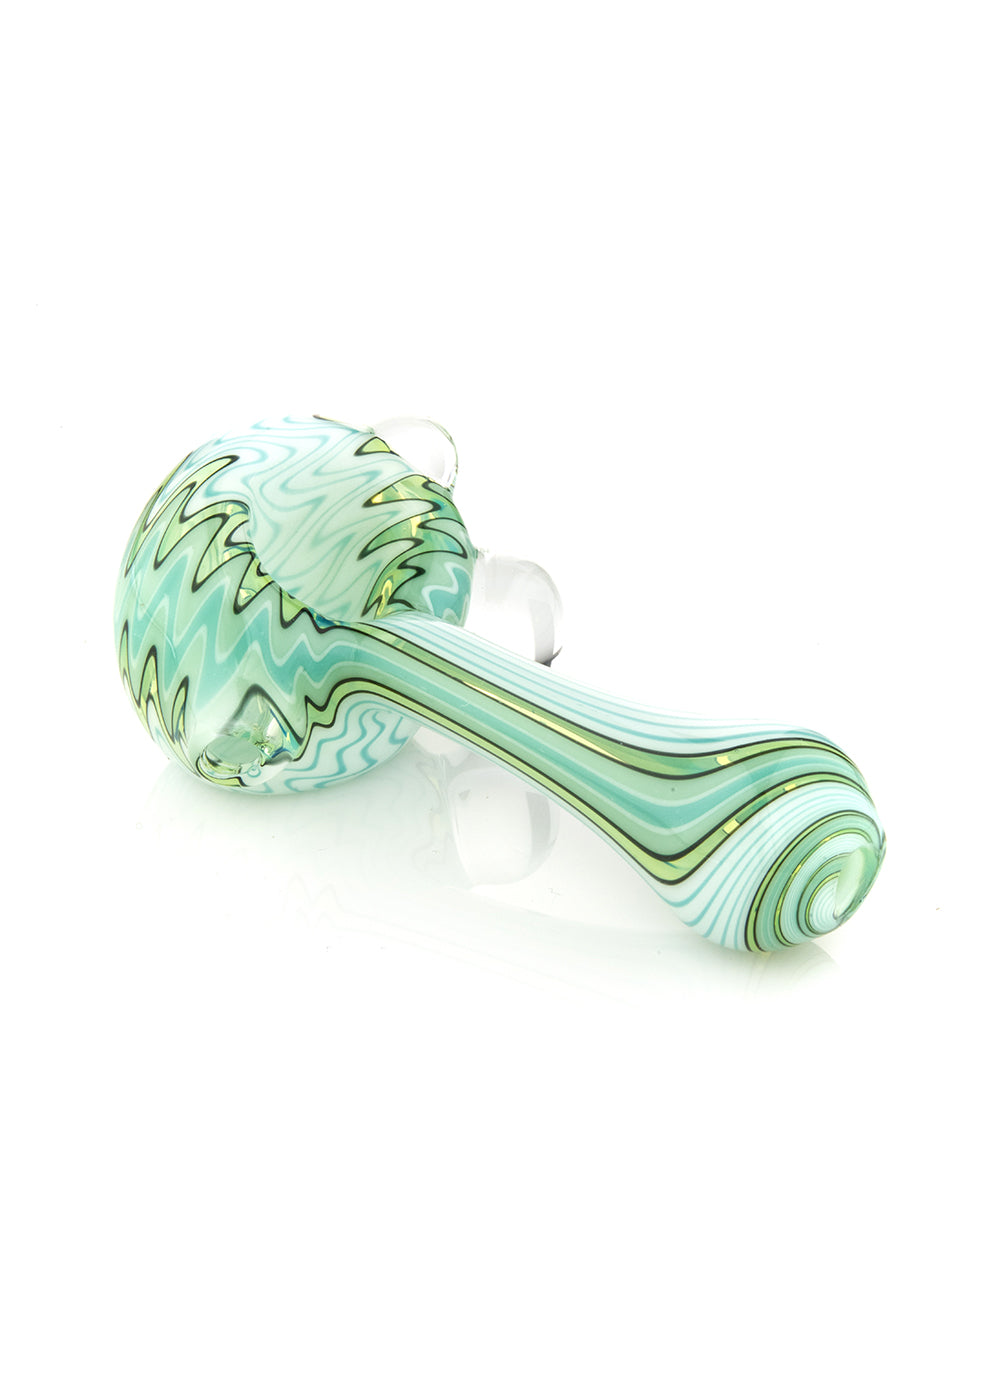 White and Blue Fade Line Work Spoon by Sand